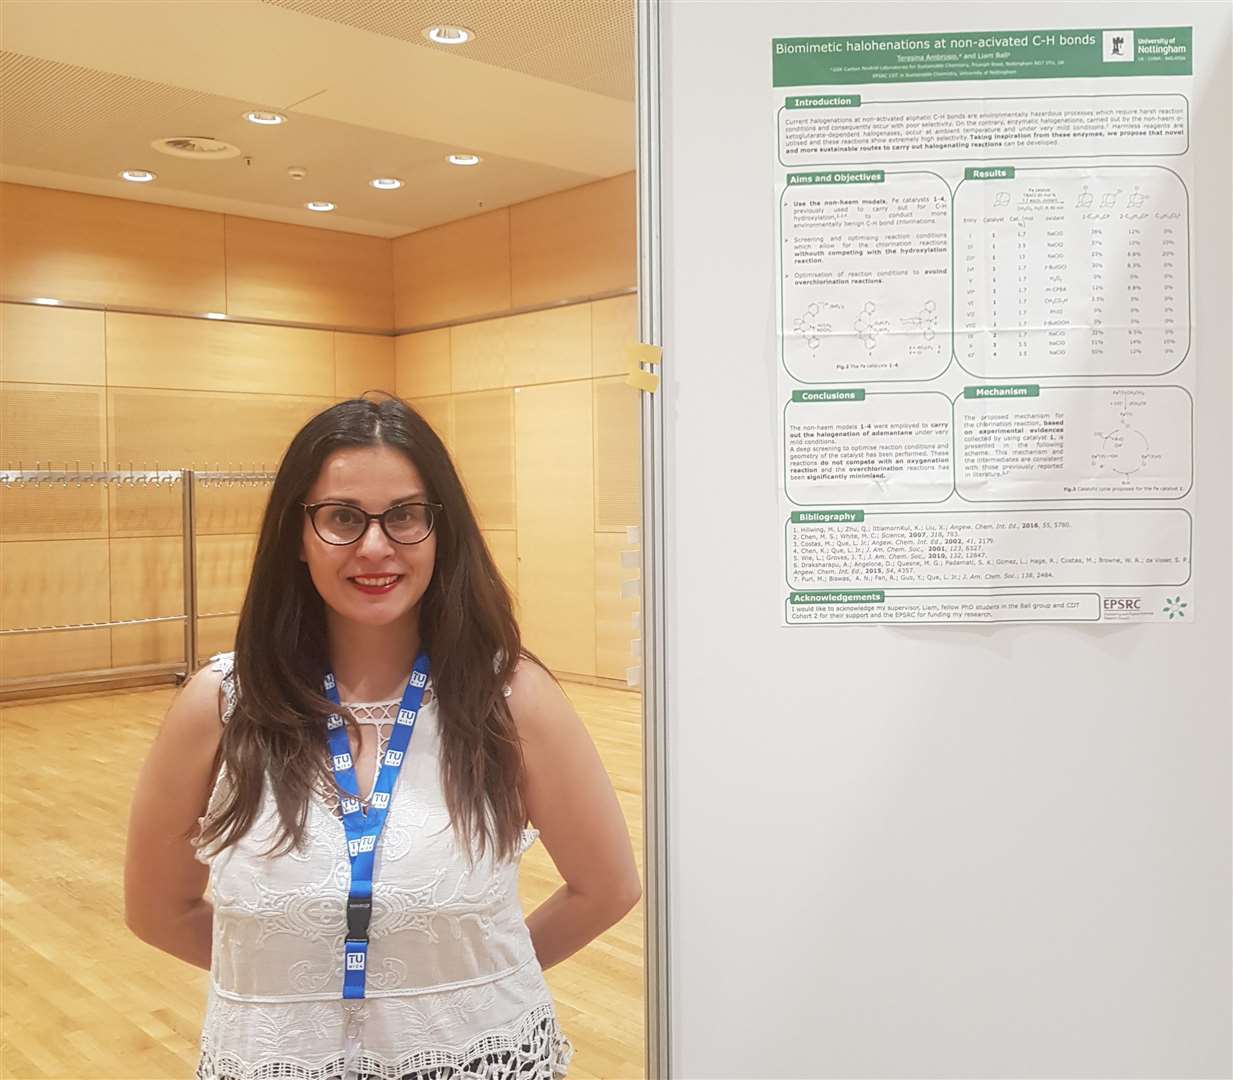 Dr Ambrosio presenting her research at an international conference in Vienna